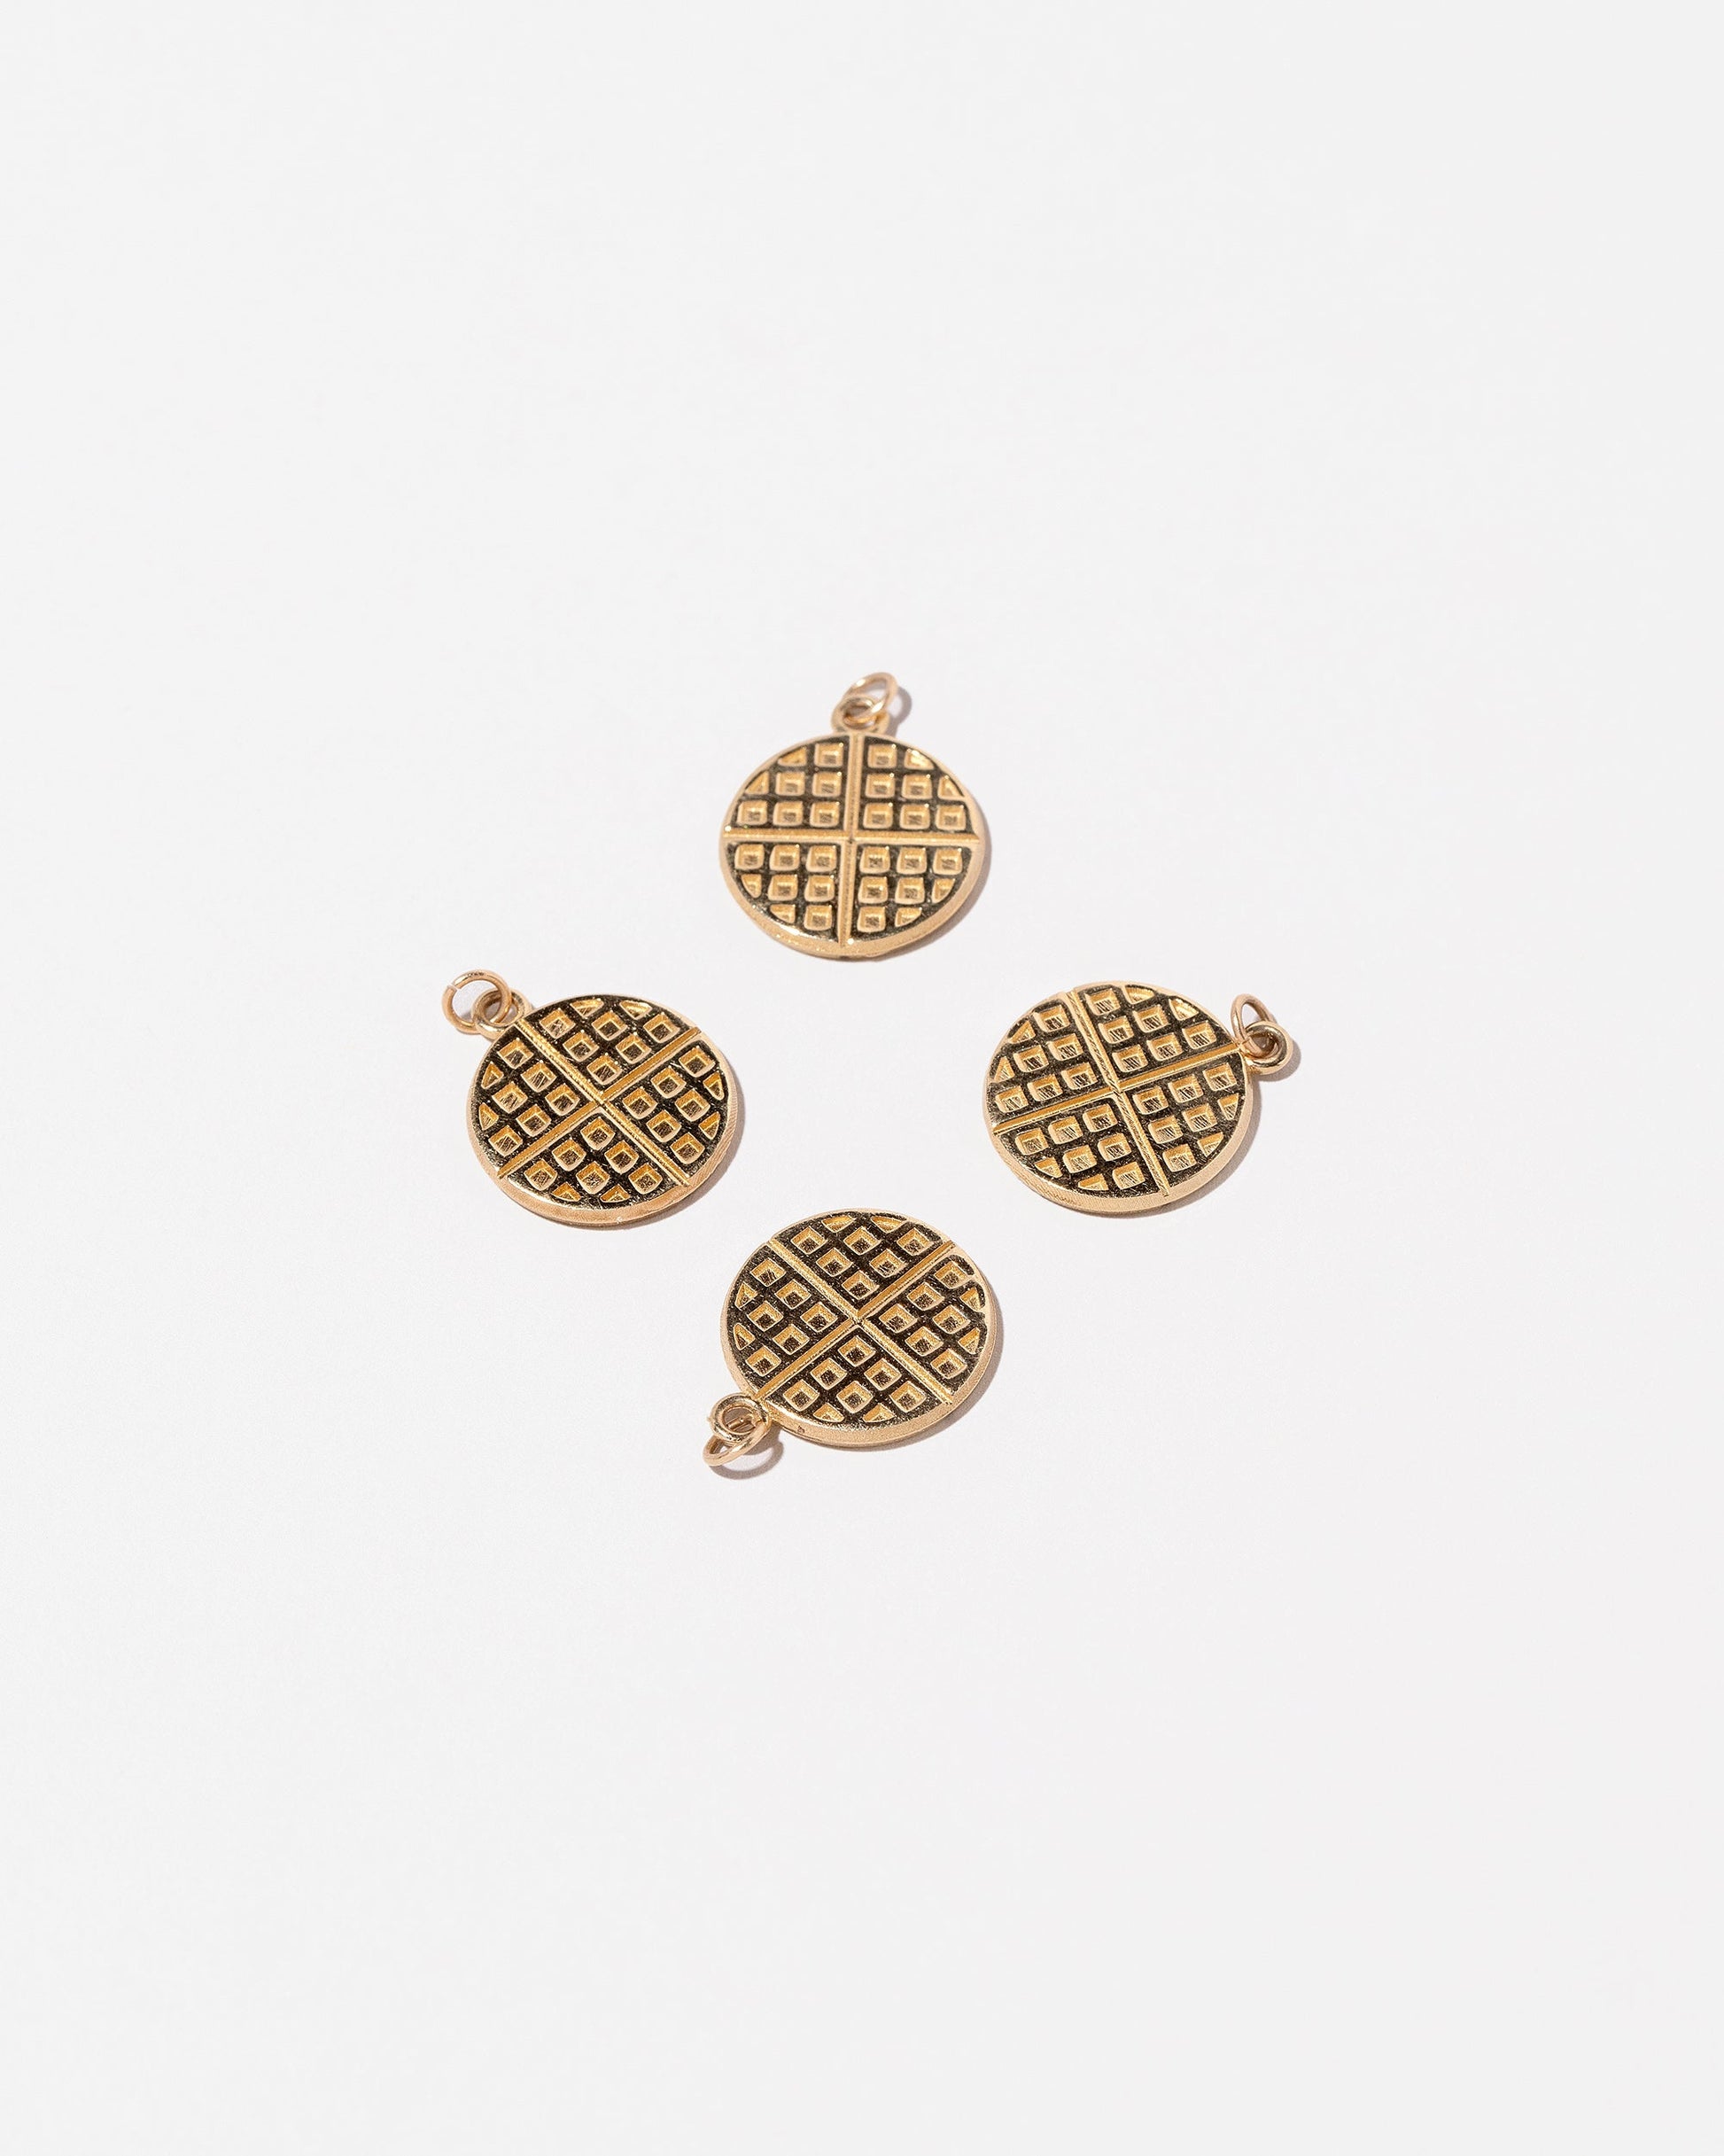  Waffle Charms - Plain on light color background.